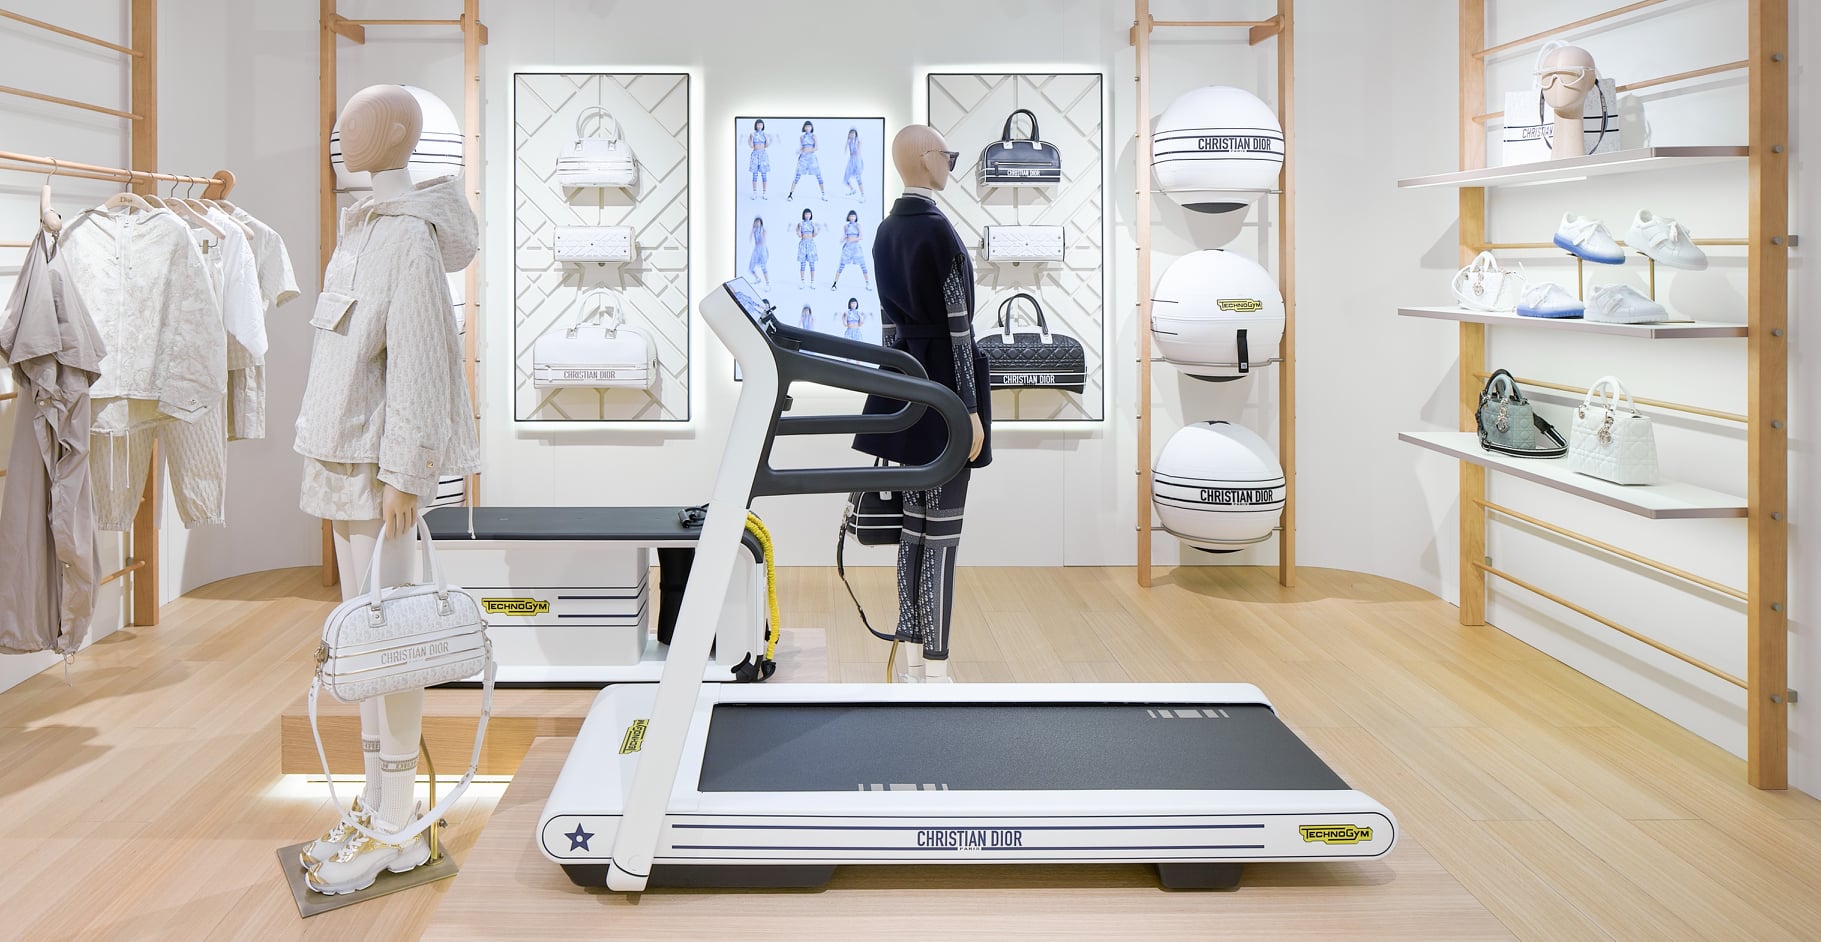 The Dior Vibe Pop-Up Stores feature the Dior and Technogym Limited Edition  pieces🏋🏻 #dior #diortechnogym #diorpopup #diorvibe